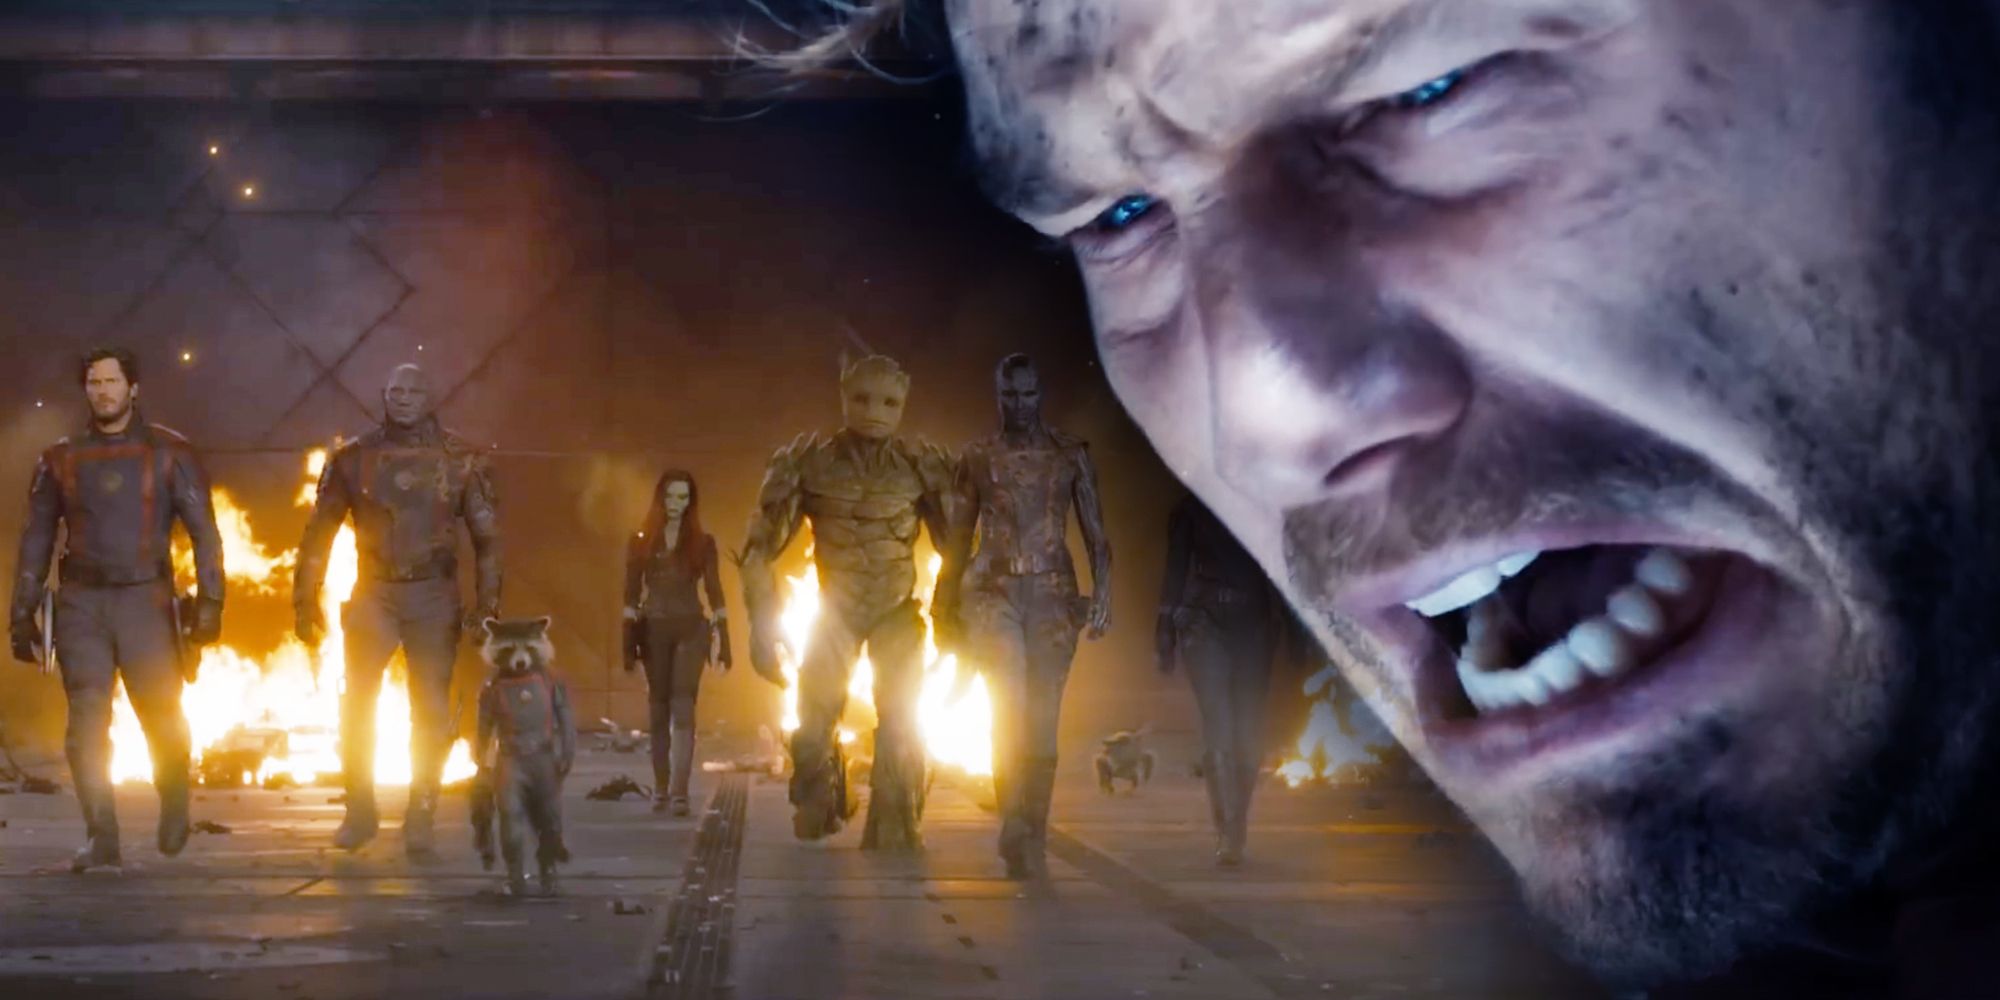 Why Drax Is Most Likely To Die in Guardians of the Galaxy Vol.-3 feature image with Peter Quill crying over the Guardians